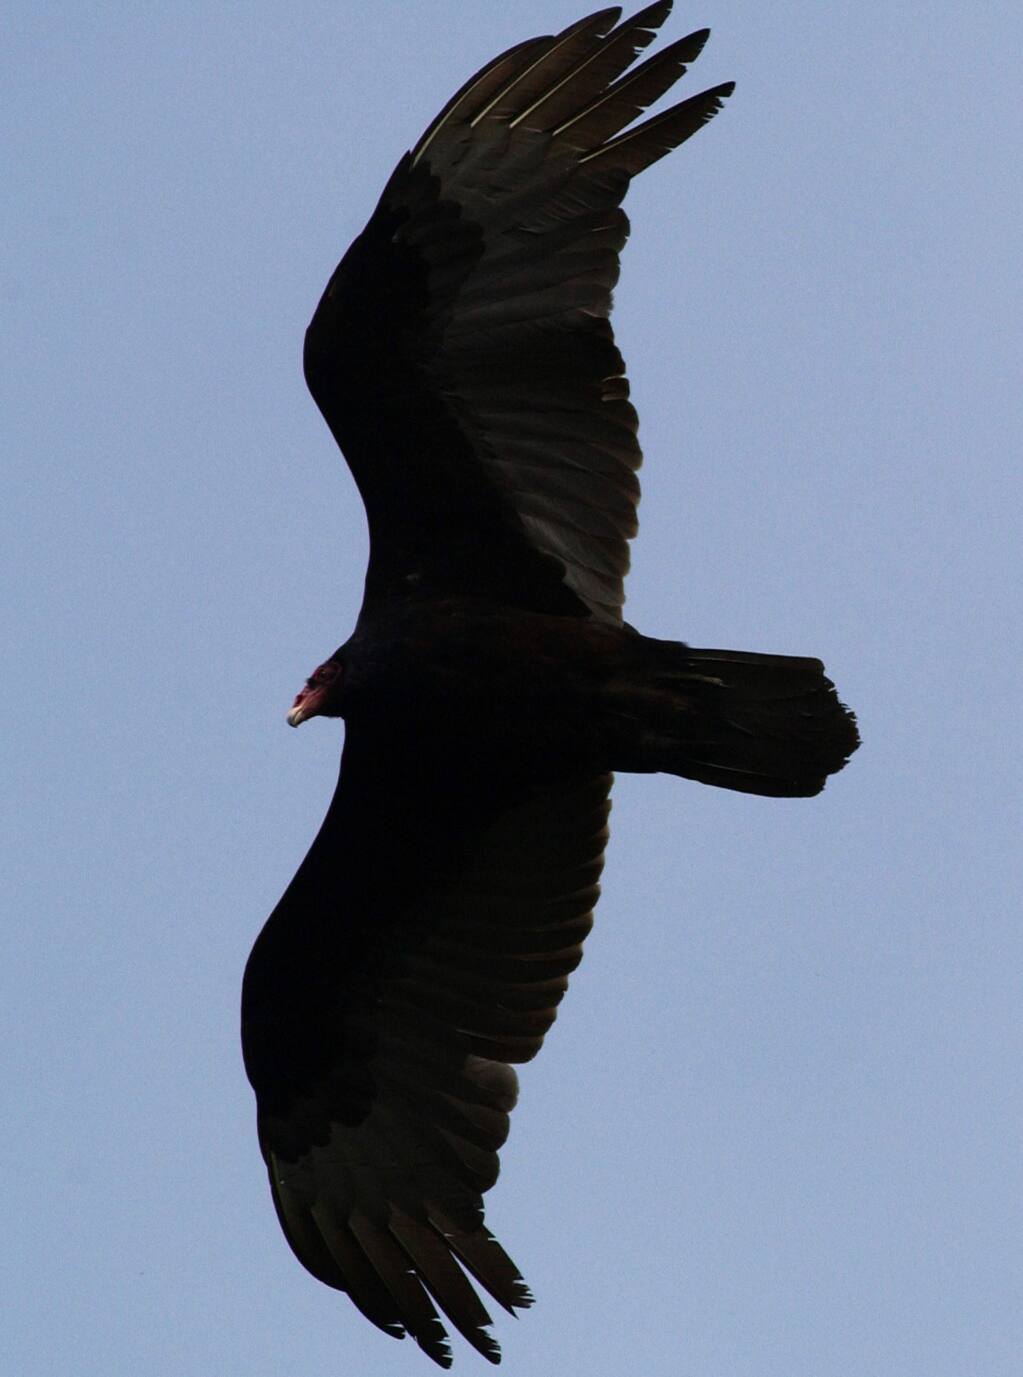 Probably My Last Turkey Vultures Of The Year – Feathered Photography